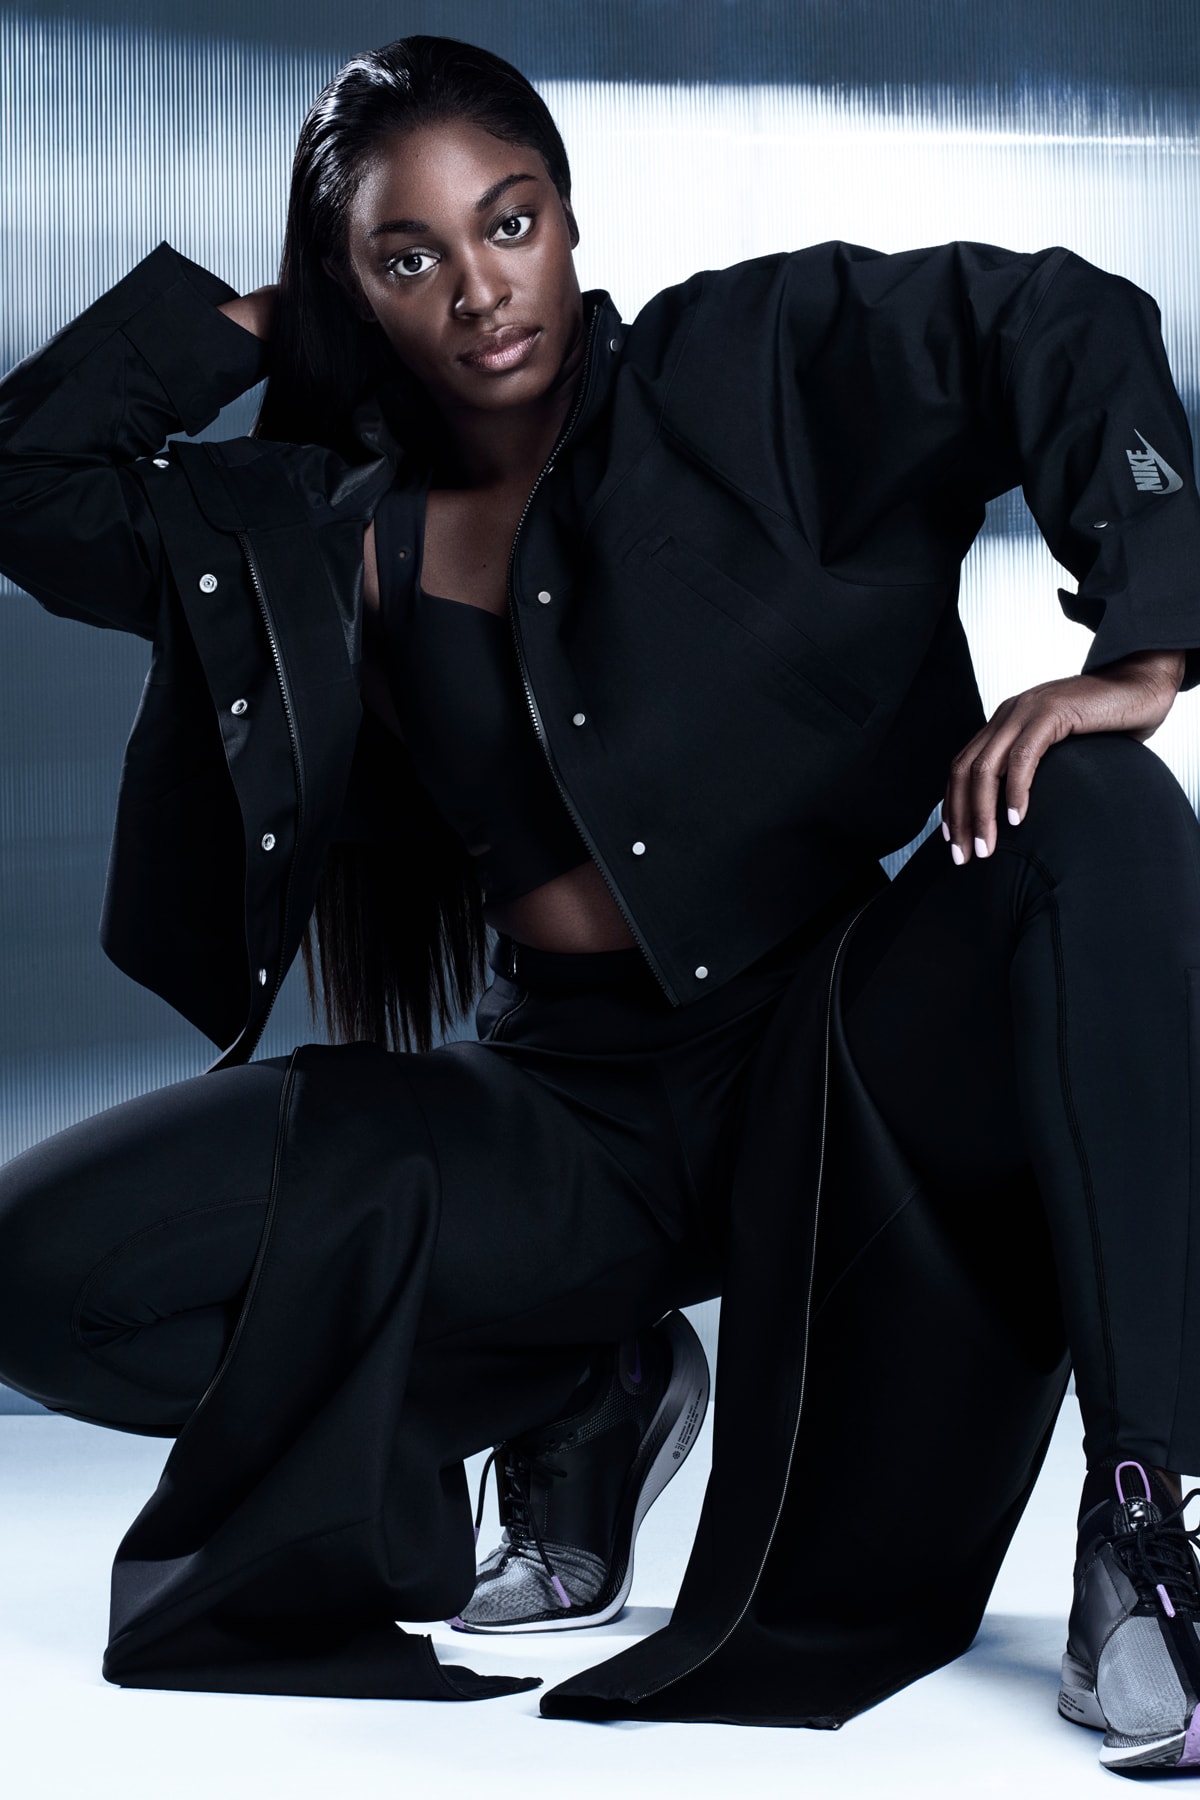 Nike City Ready Collection Campaign Sloane Stephens Motion Adaptation Bra Crop Jacket Tights Black